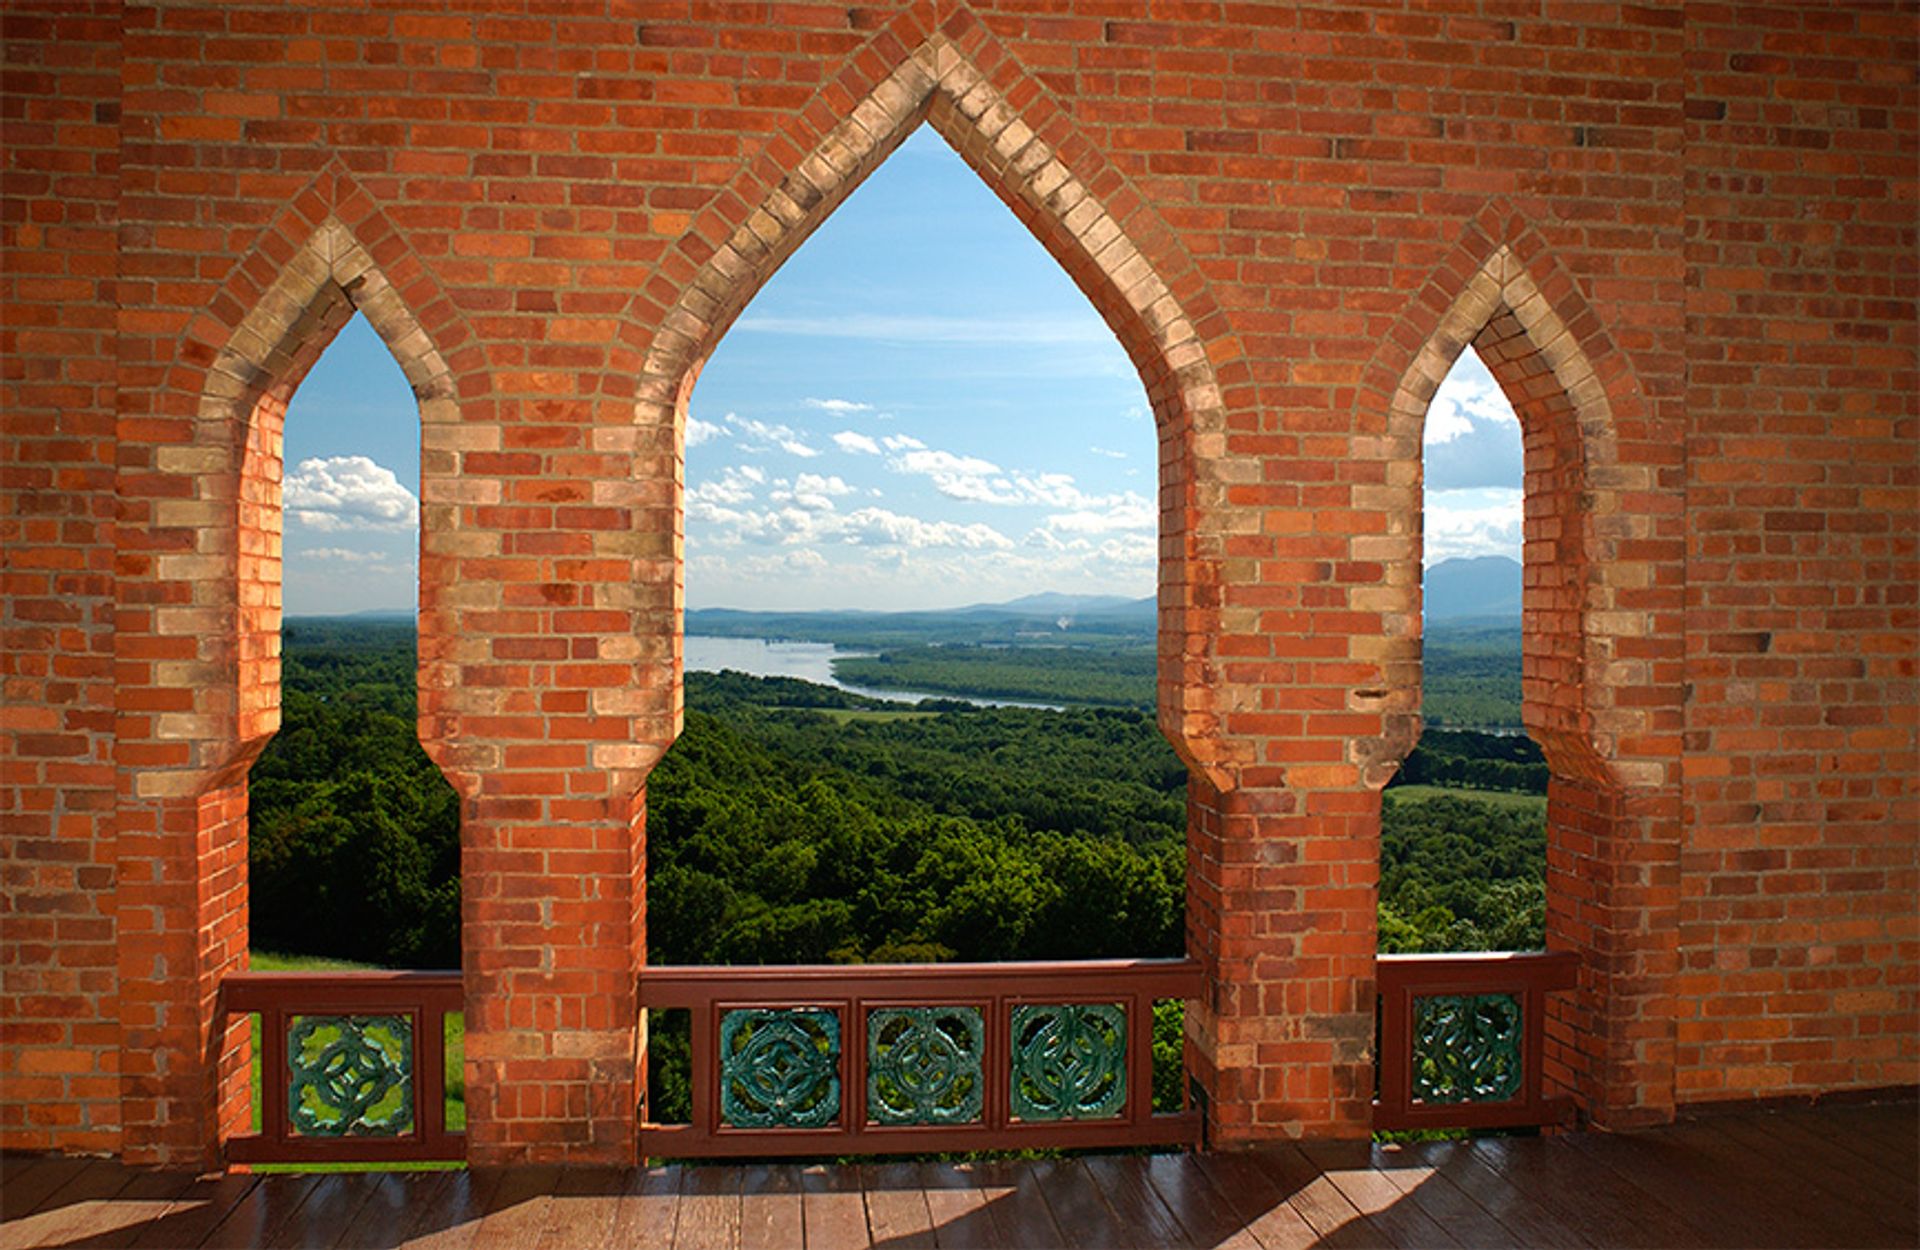 View of the Hudson River and Catskills, from the Bell Tower at Olana, the painter Fredric Church's home in upstate New York Photo: Andy Wainwright, 2004